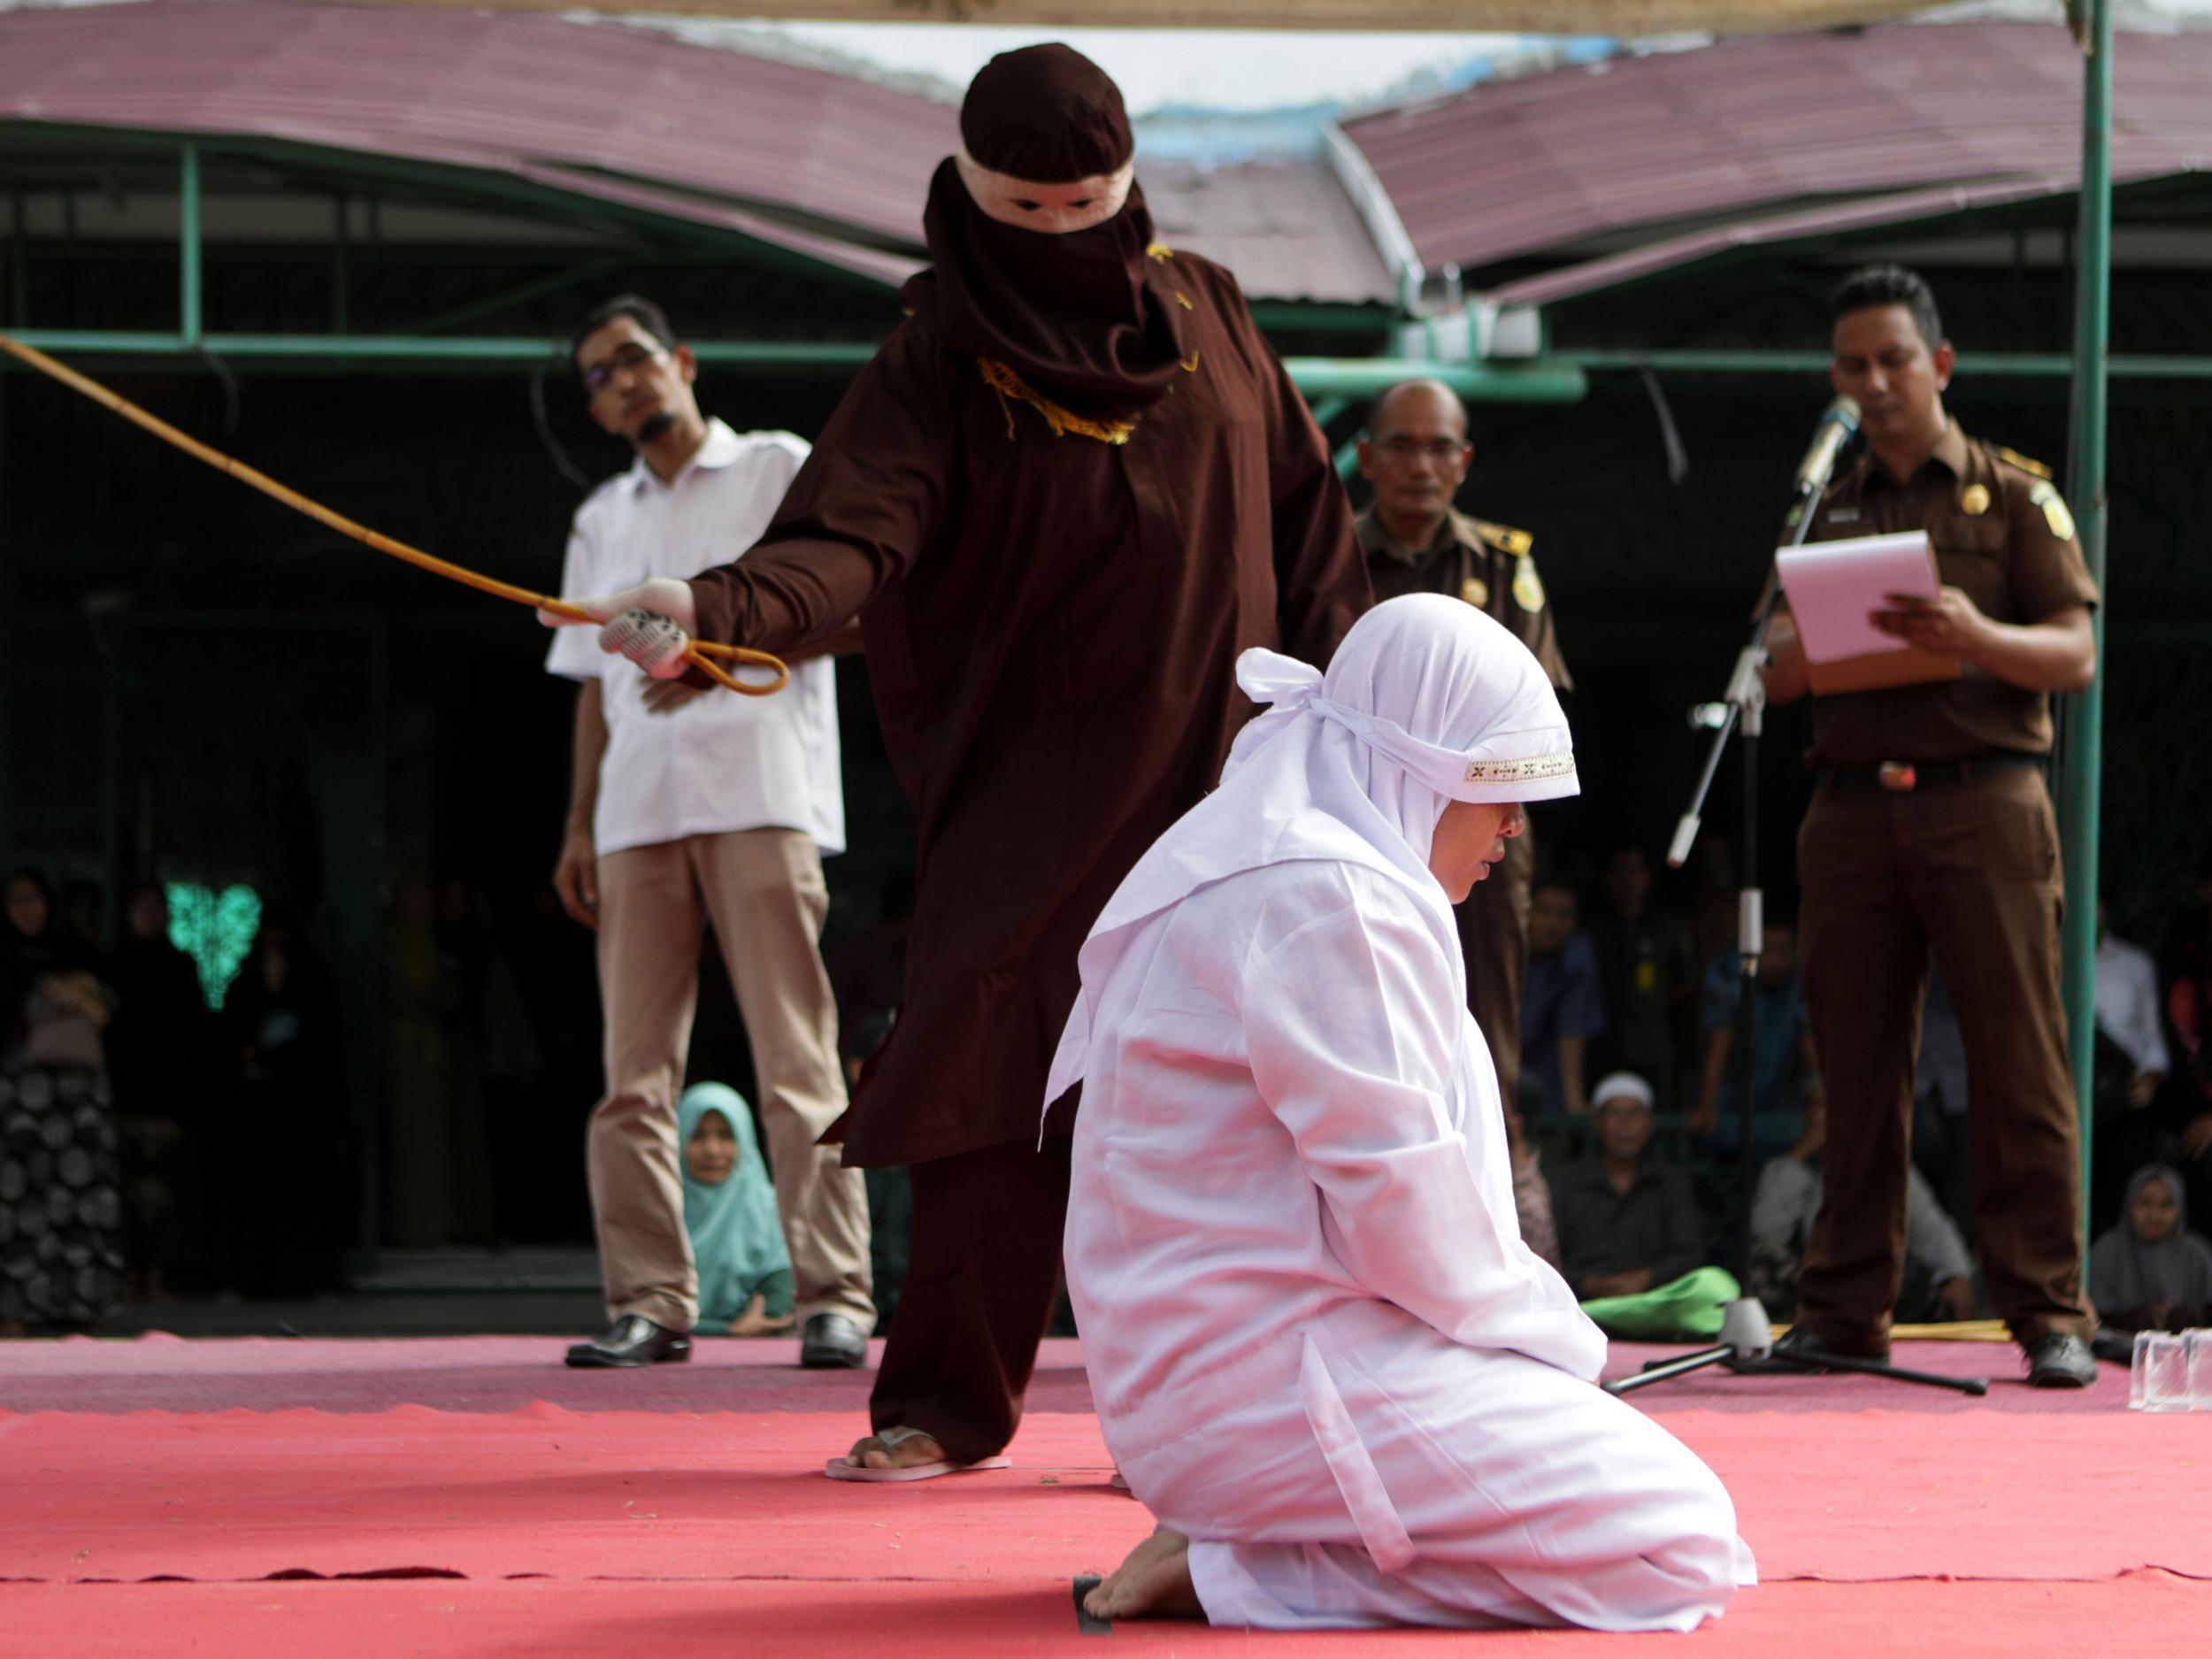 Indonesian woman lashed 100 times for being in presence of man she was not married to The Independent The Independent image